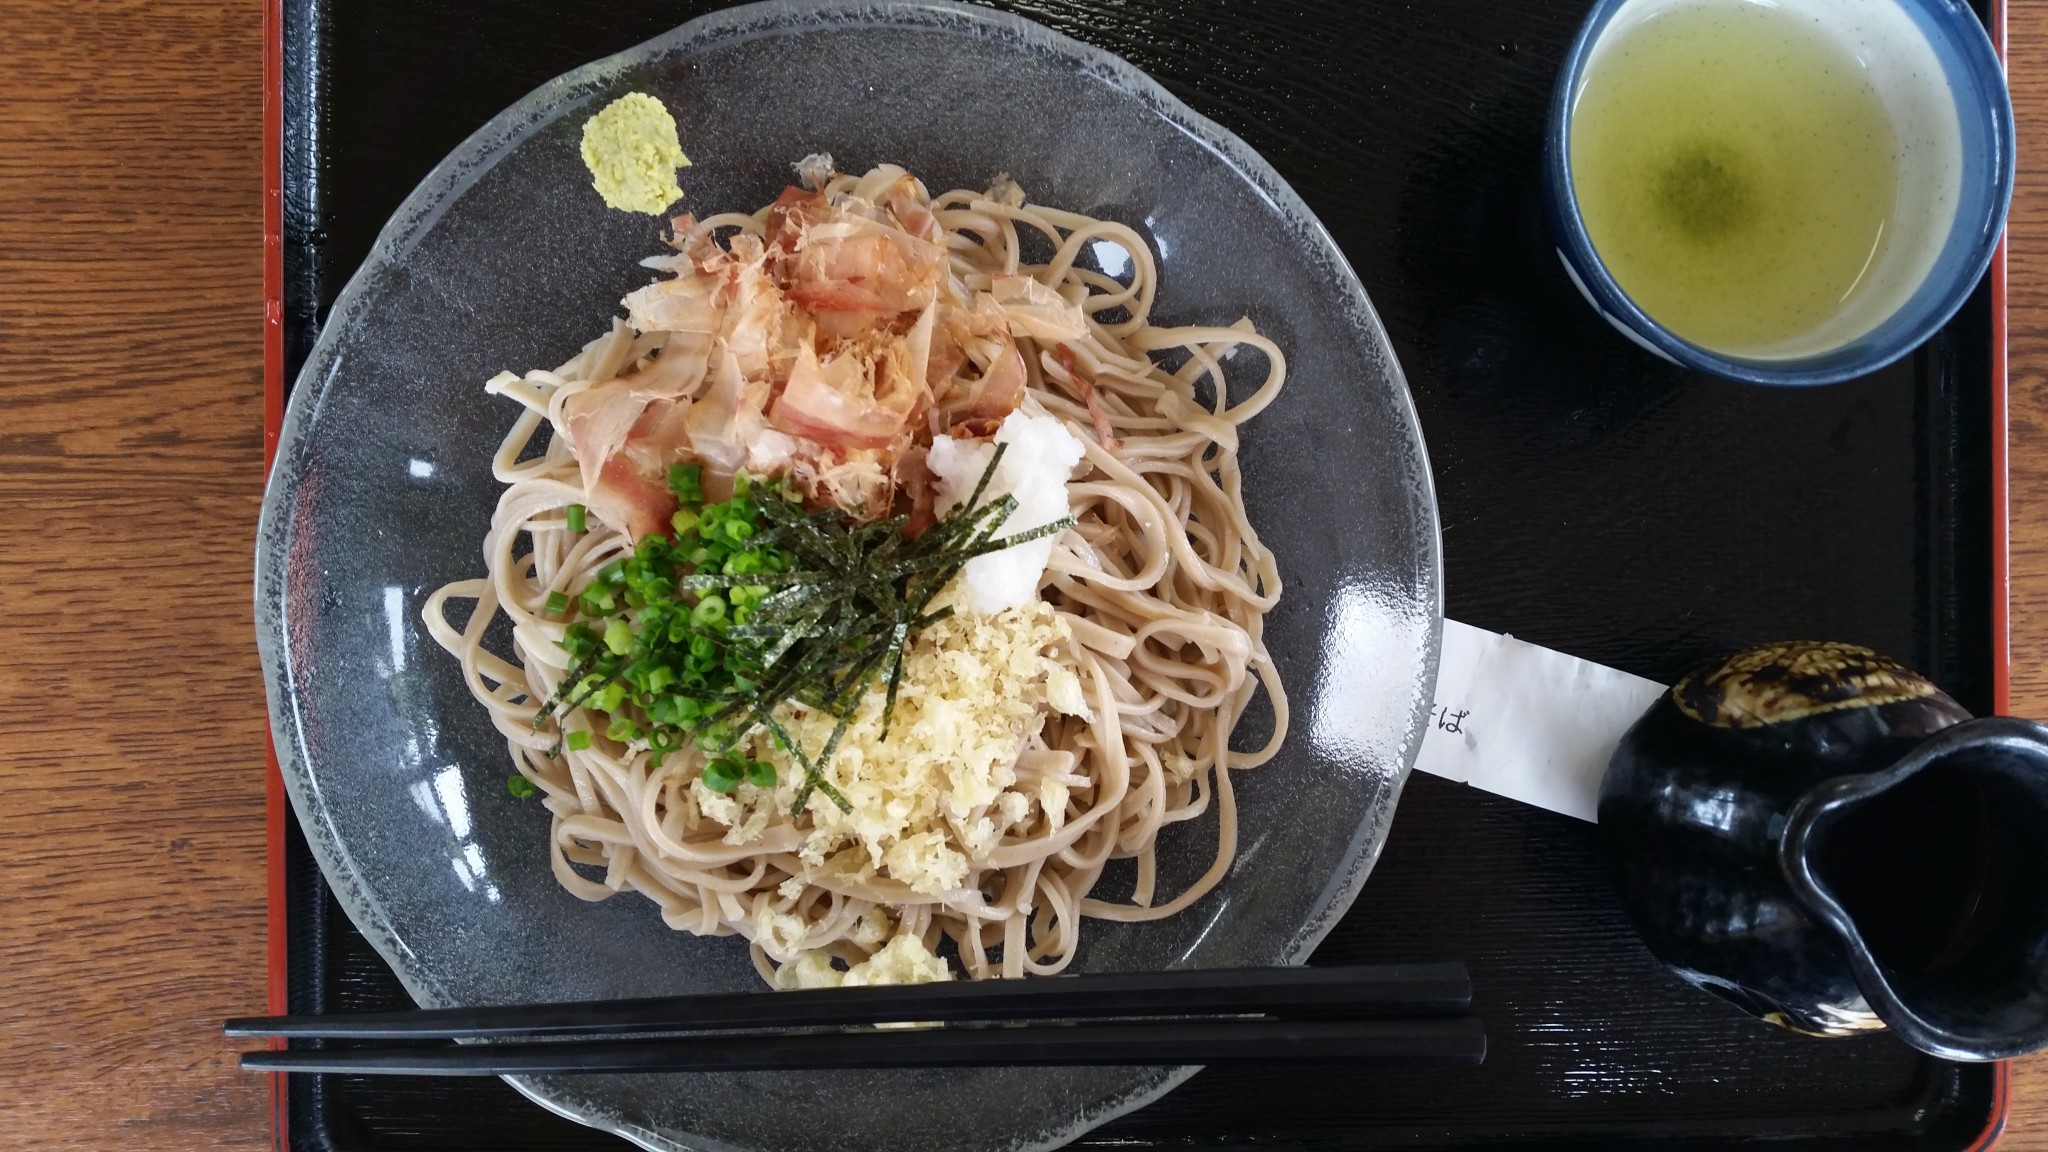 Use your hands and make your own soba noodles in Kagoshima